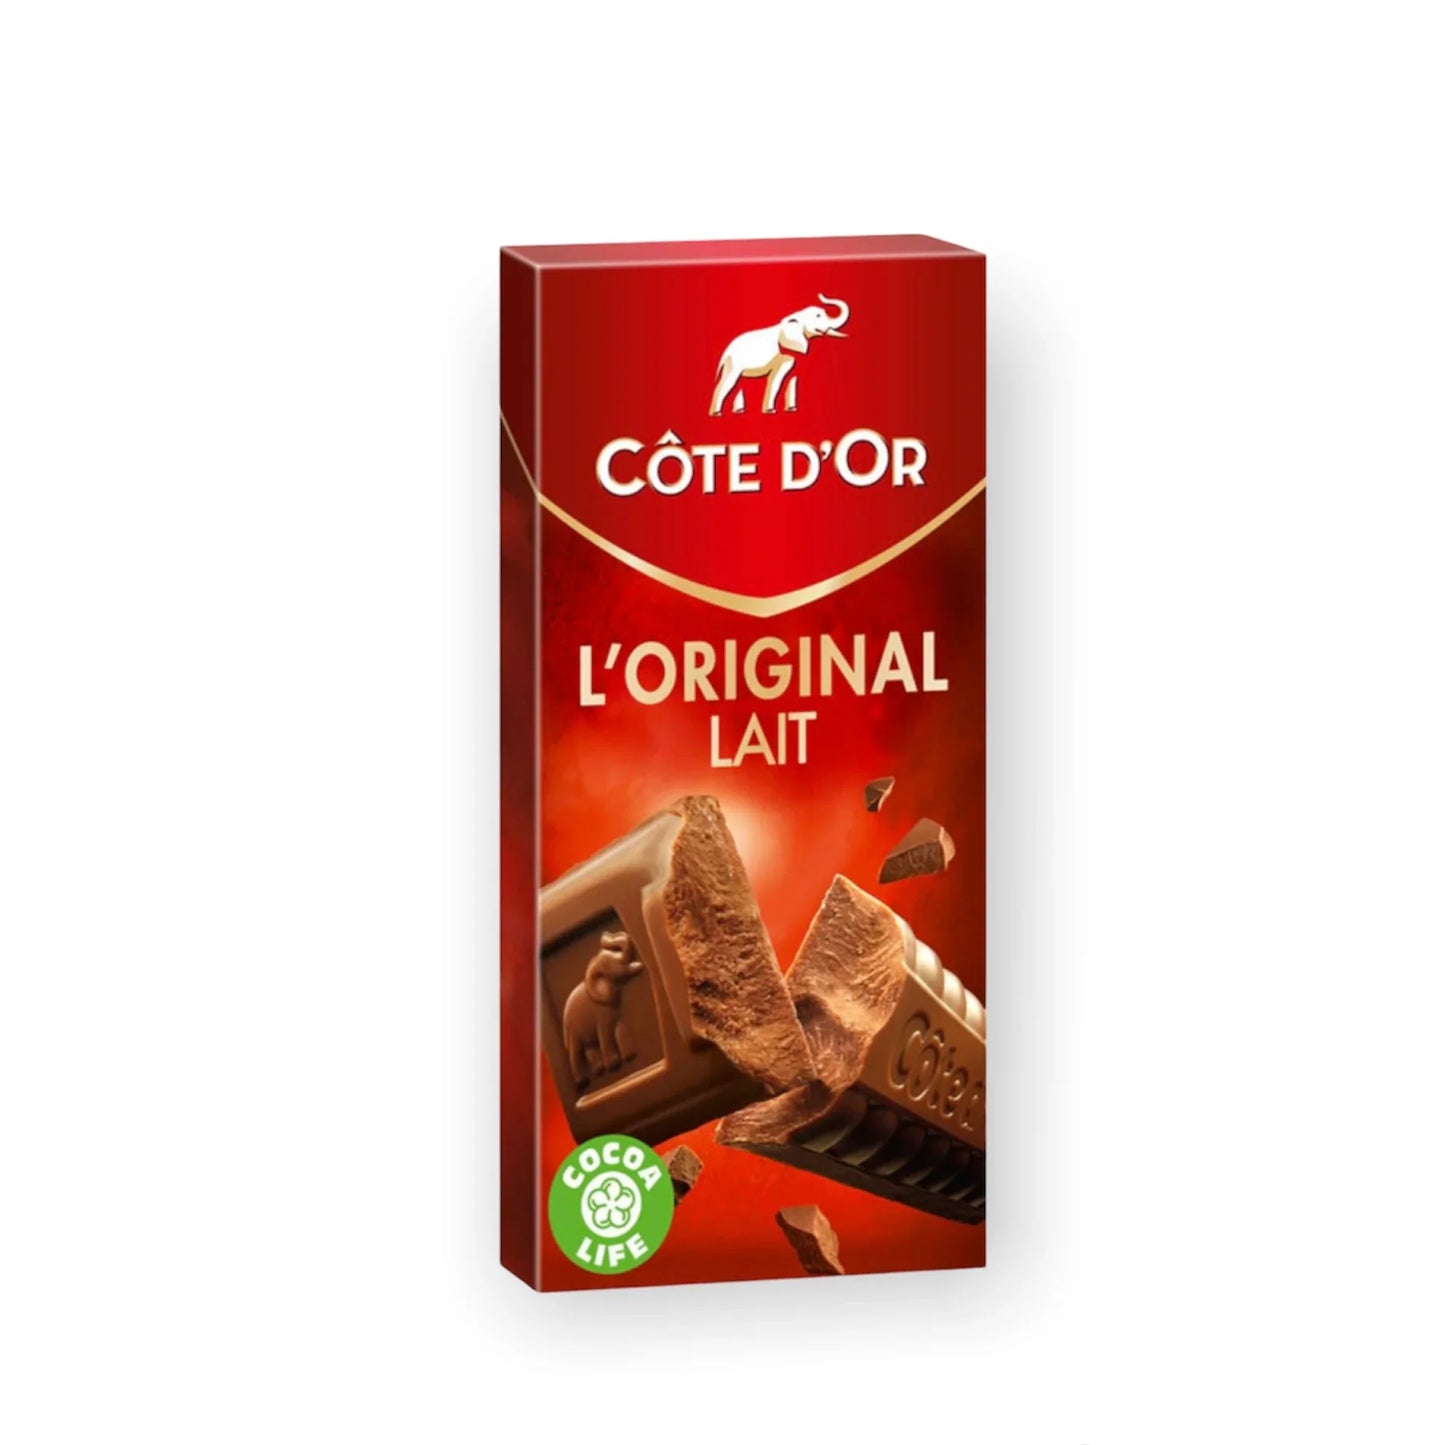 Cote D'or Chocolate, Milk chocolate (France)